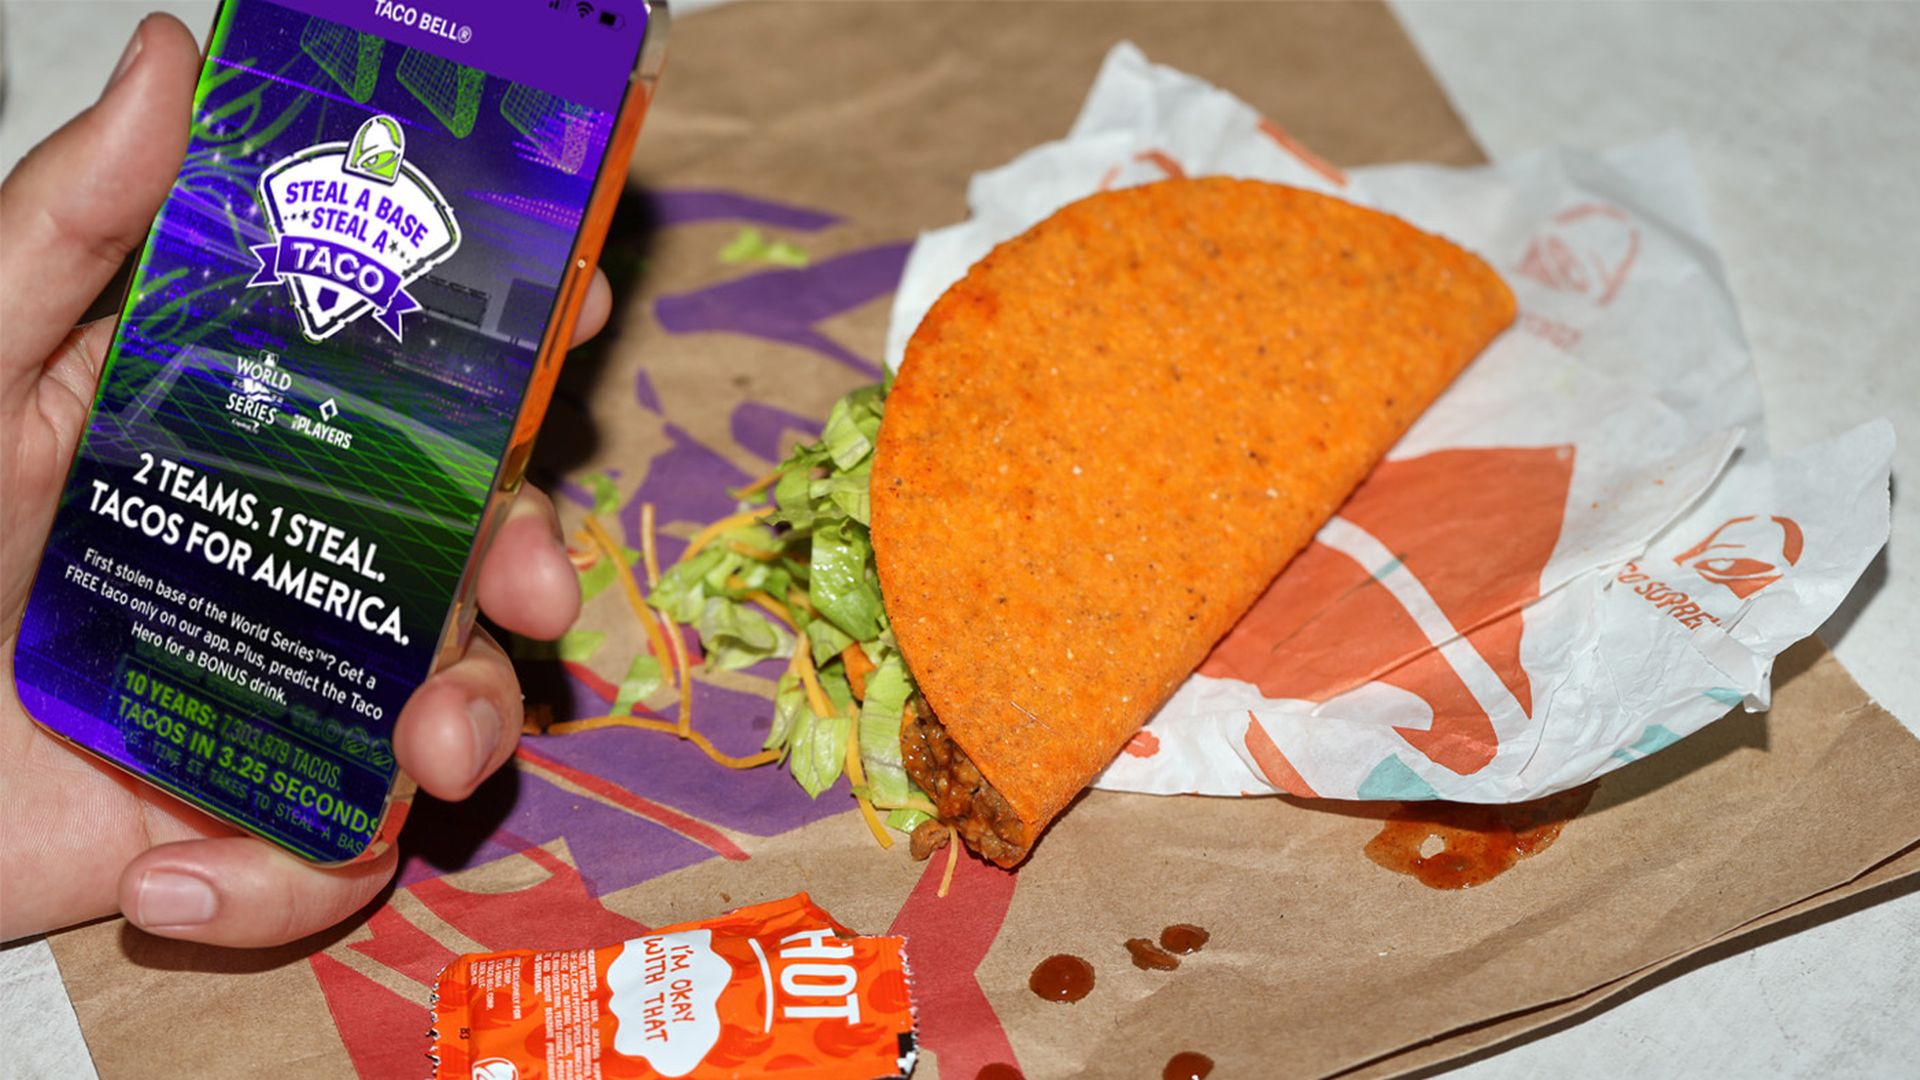 Hand holding phone with Taco Bell promotion on it and a Taco Bell taco, sauce packet